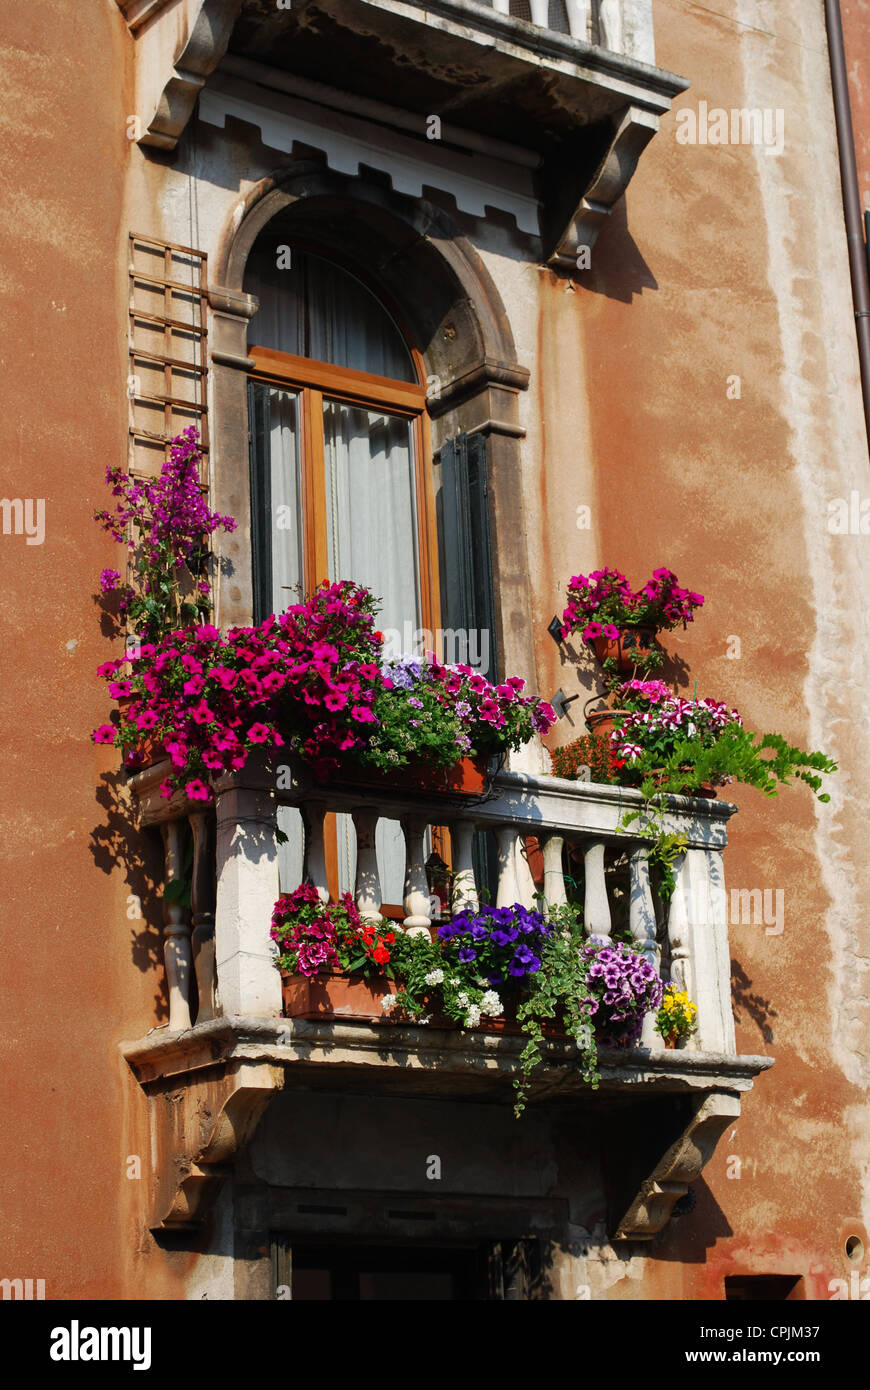 Ancient arched window with balcony and flowers in Venice, Italy Stock Photo